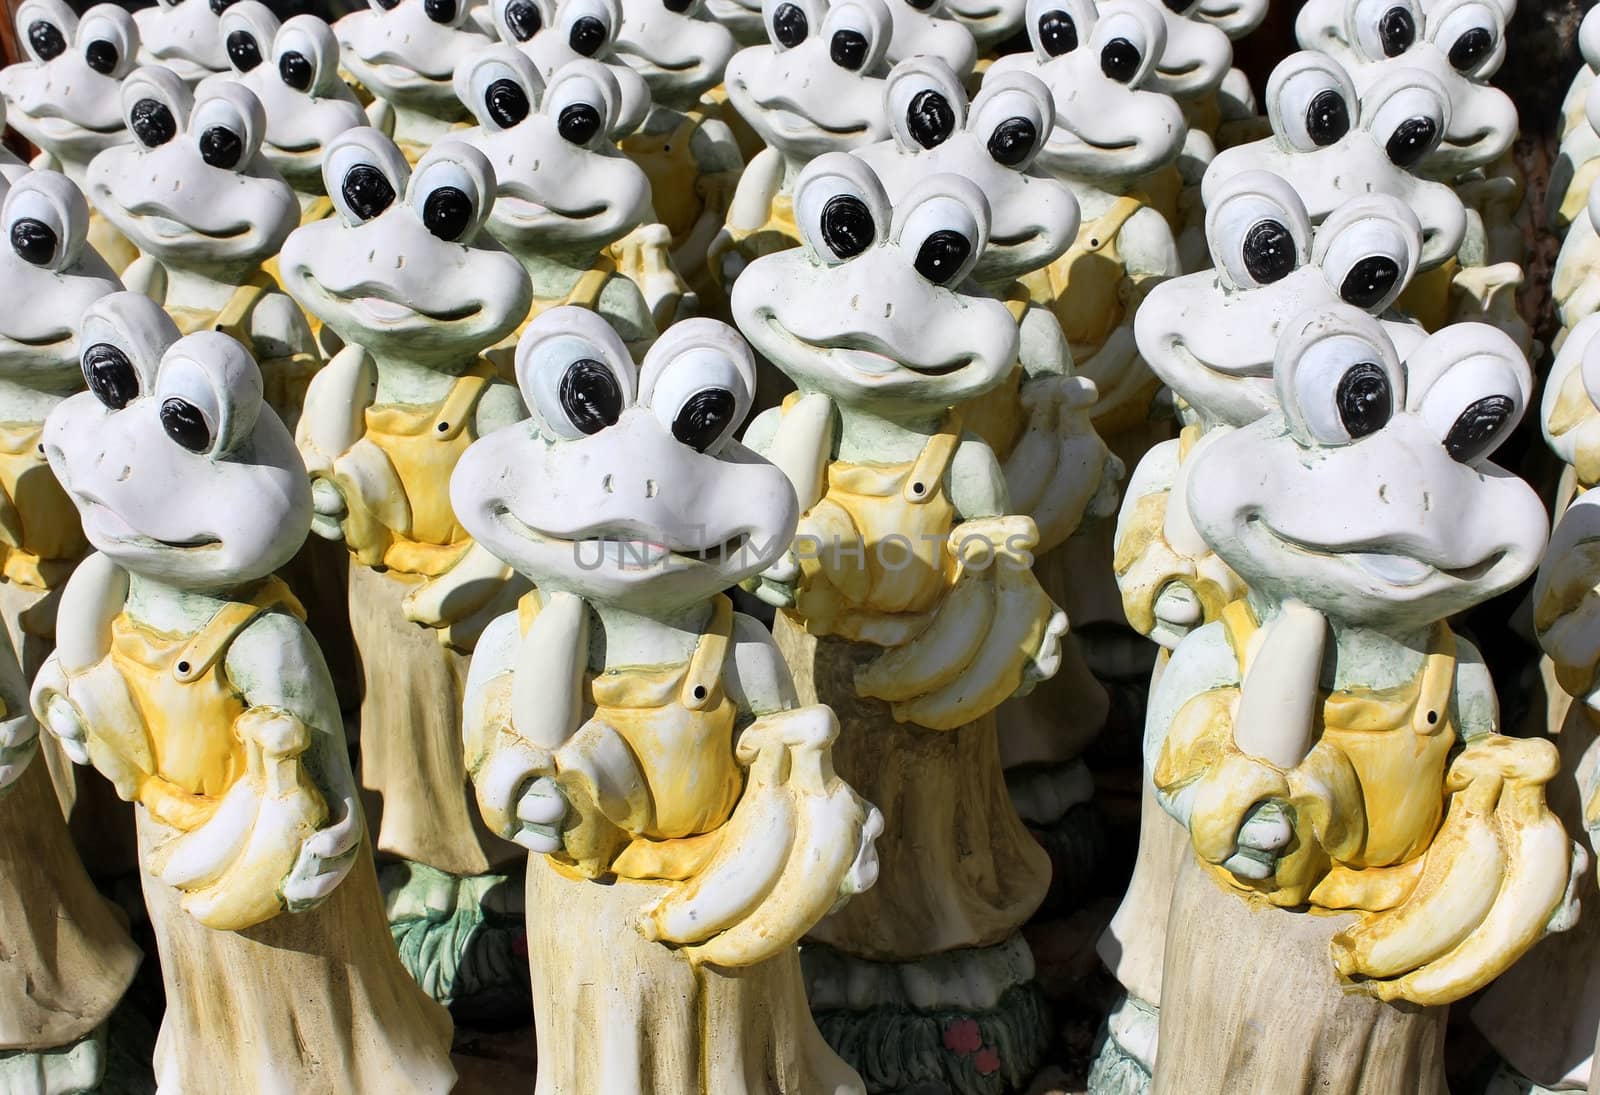 Clay figures of frogs by irisphoto4